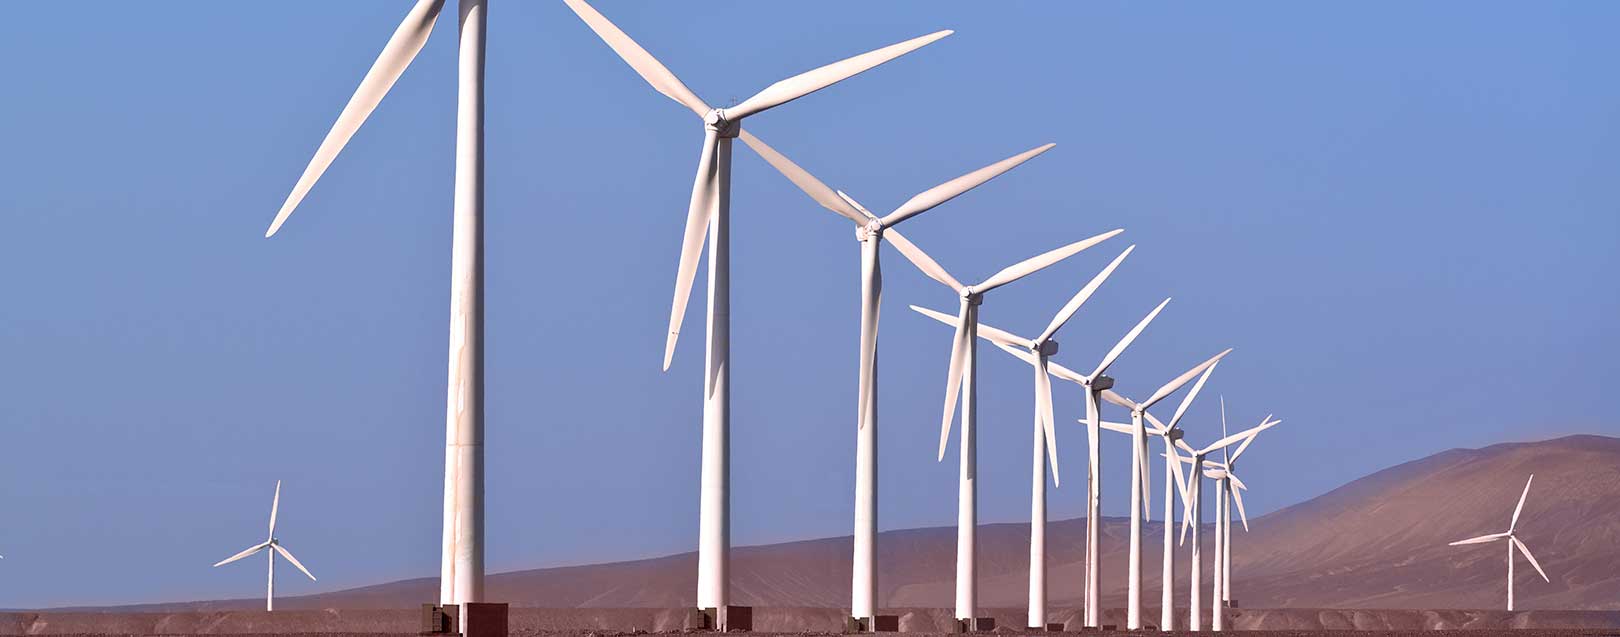 Suzlon installs 900 MW projects in India in FY16